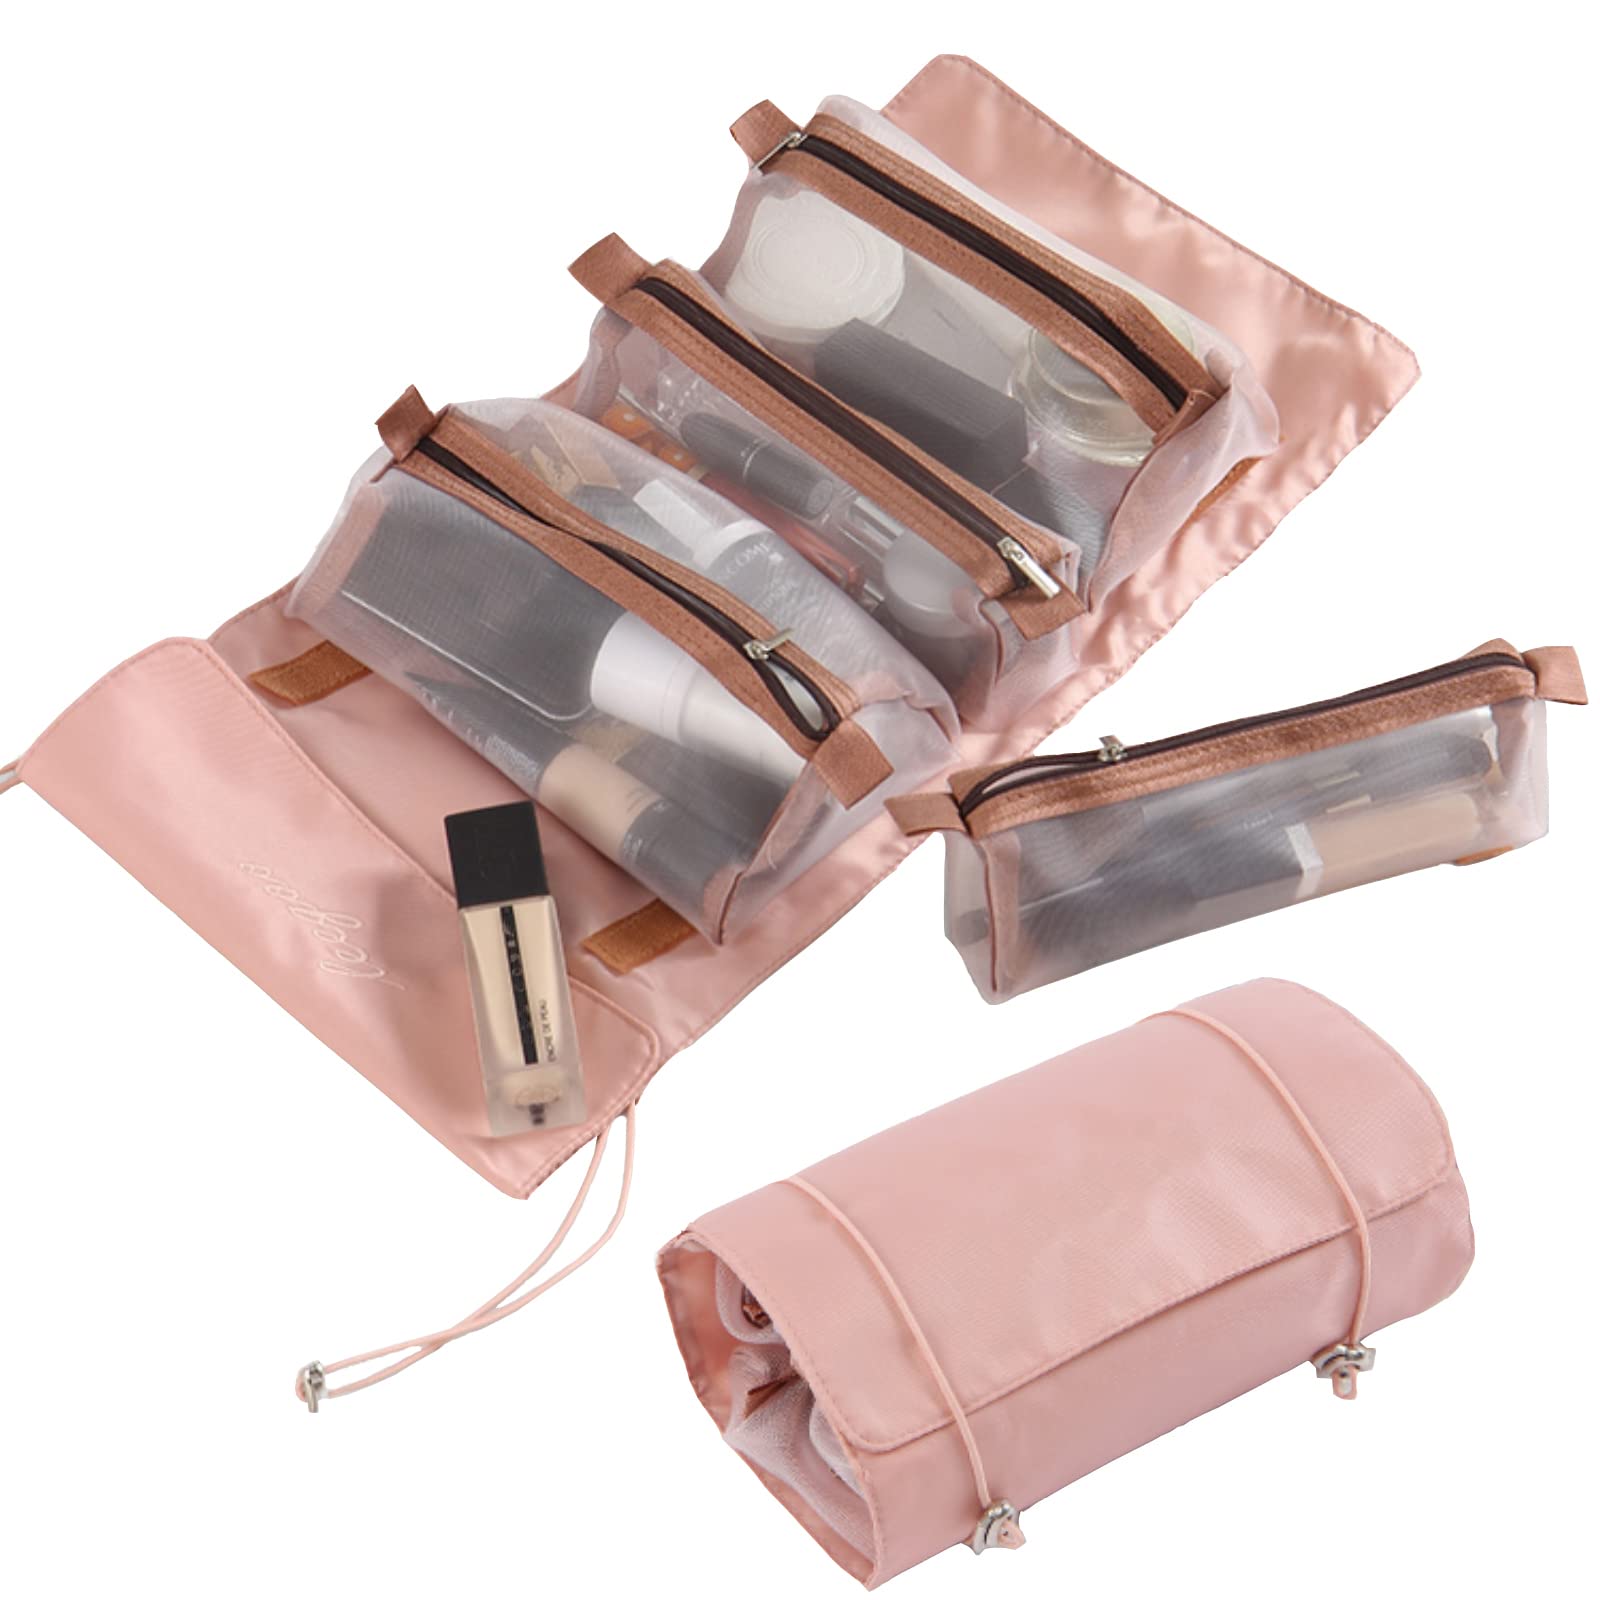 【High capacity】4-in-1 Detachable travel cosmetic bag